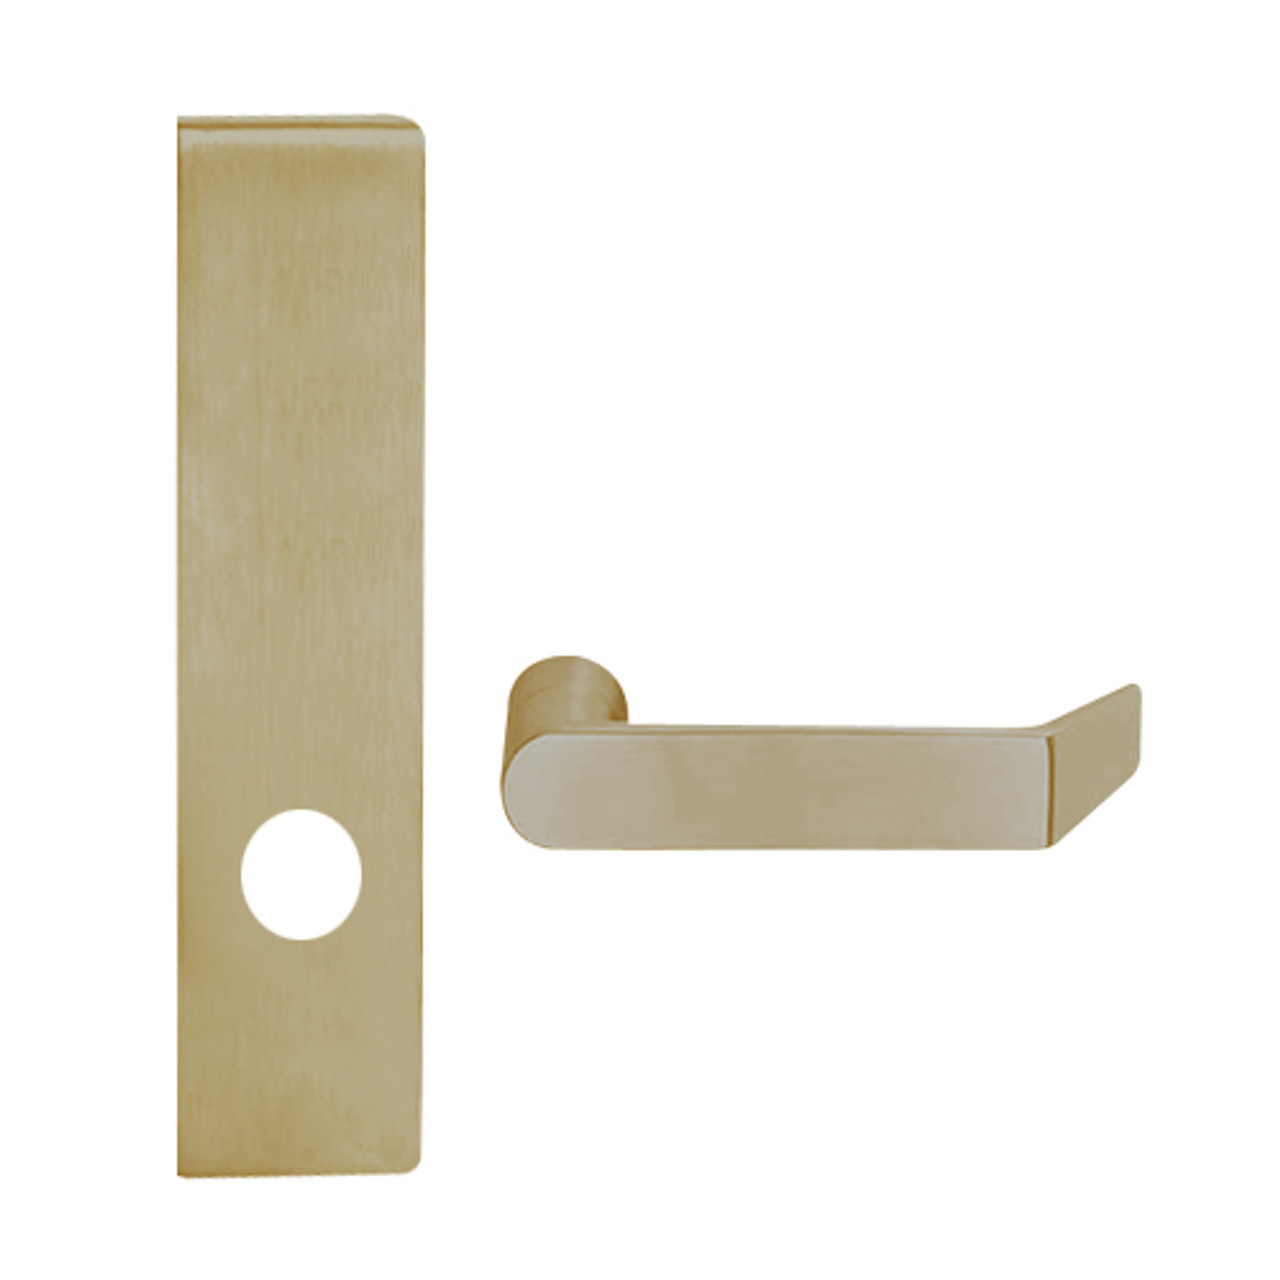 L9010-06L-612 Schlage L Series Passage Latch Commercial Mortise Lock with 06 Cast Lever Design in Satin Bronze